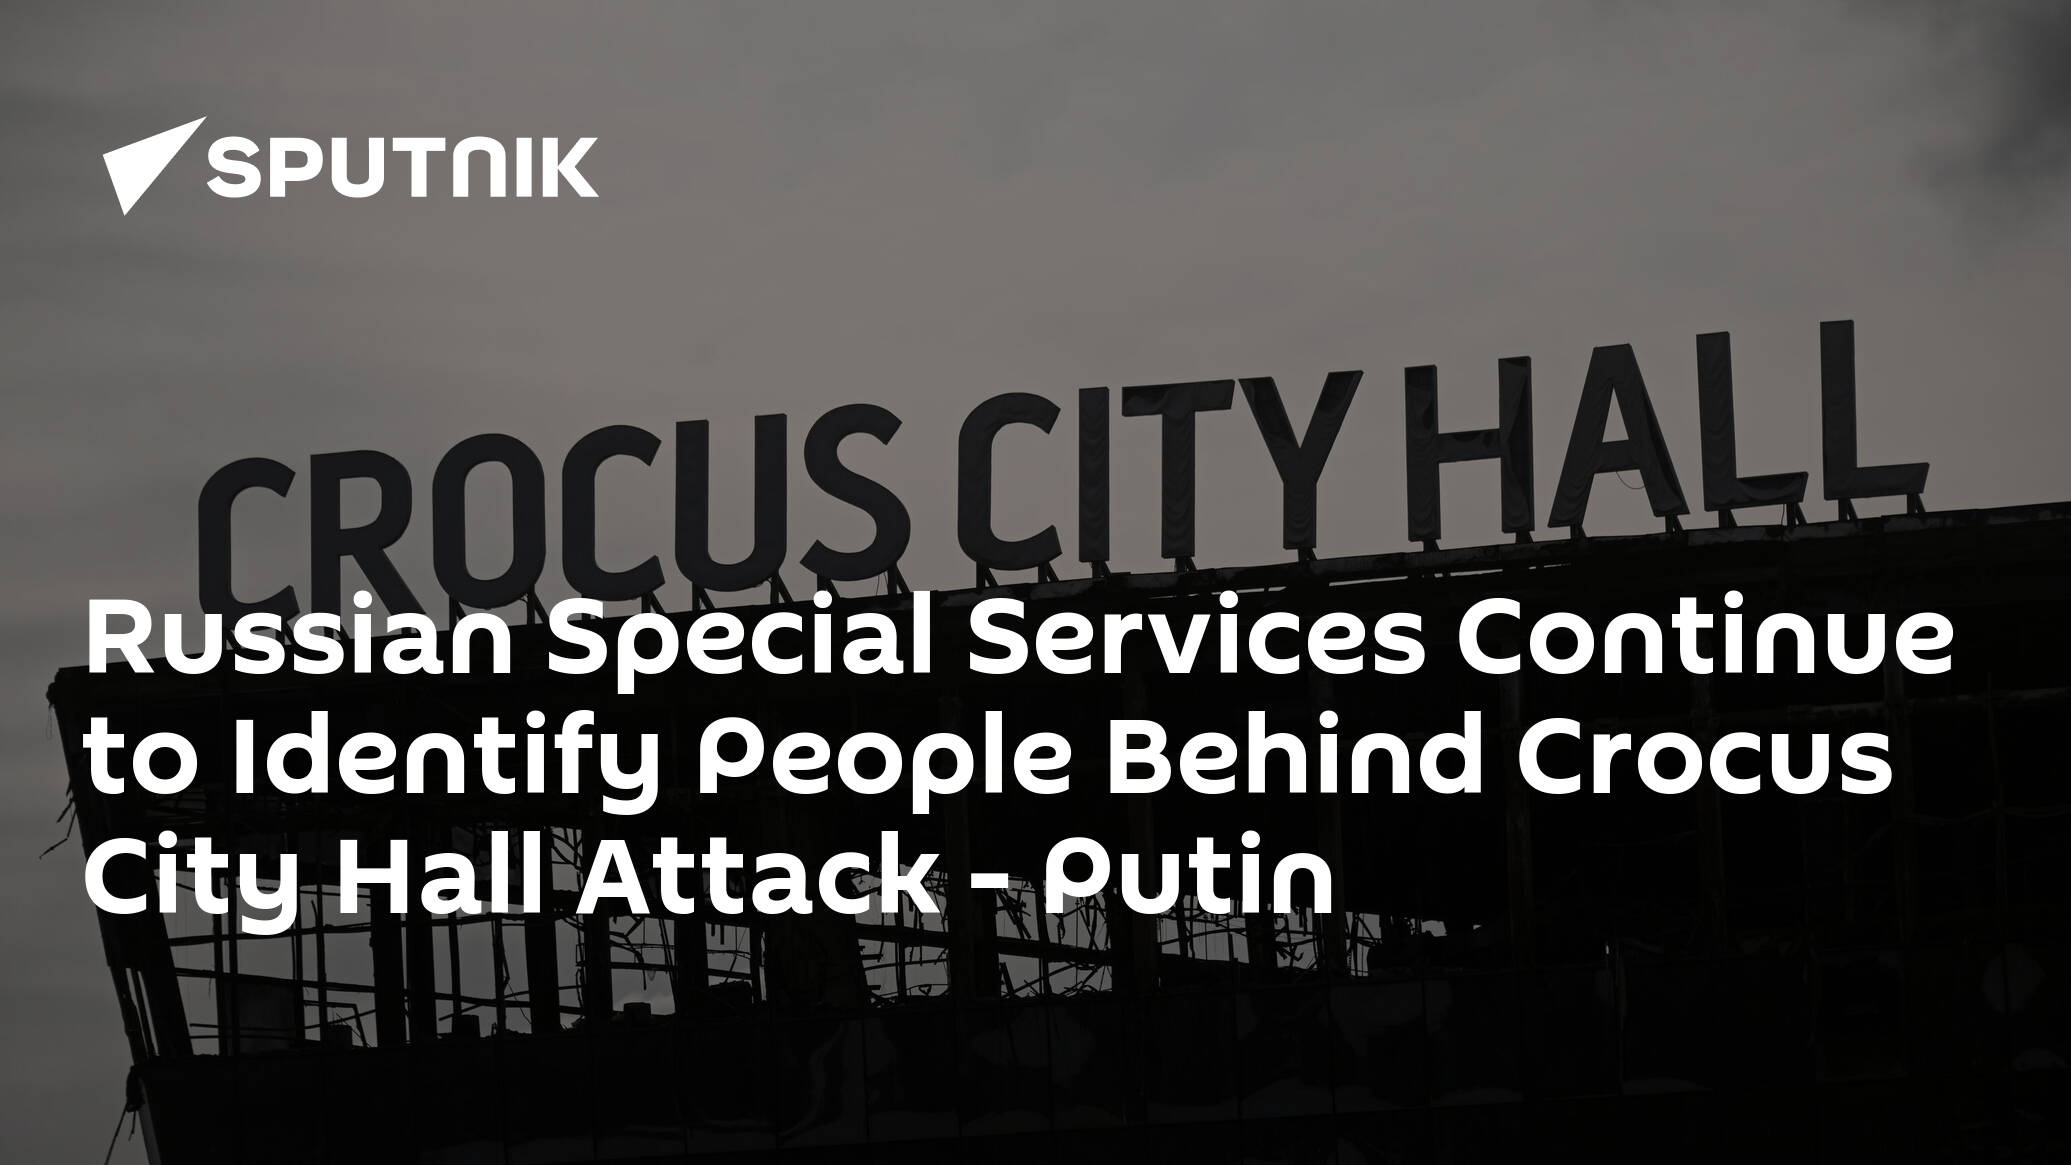 Russian Special Services Continue to Identify People Behind Crocus City Hall Attack – Putin